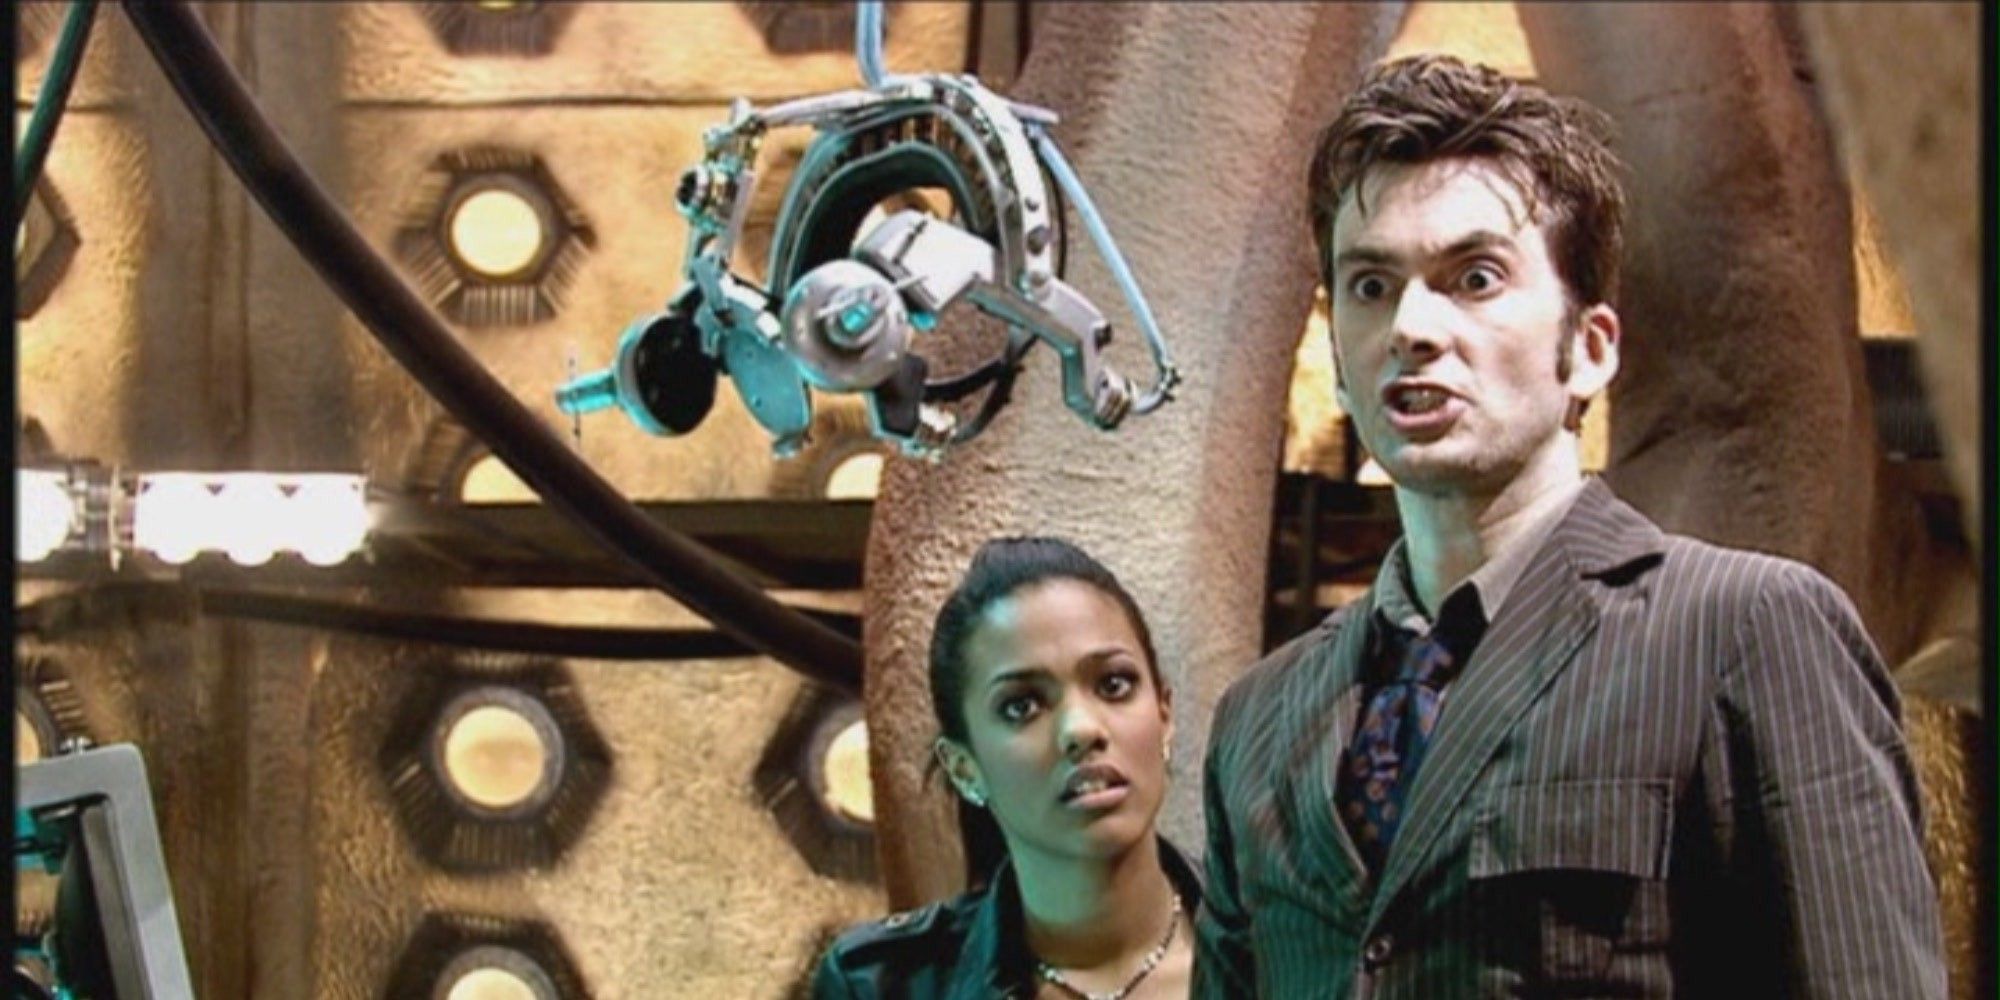 David Tennant as Tenth Doctor and Freema Agyeman as Martha in Doctor Who chameleon arch